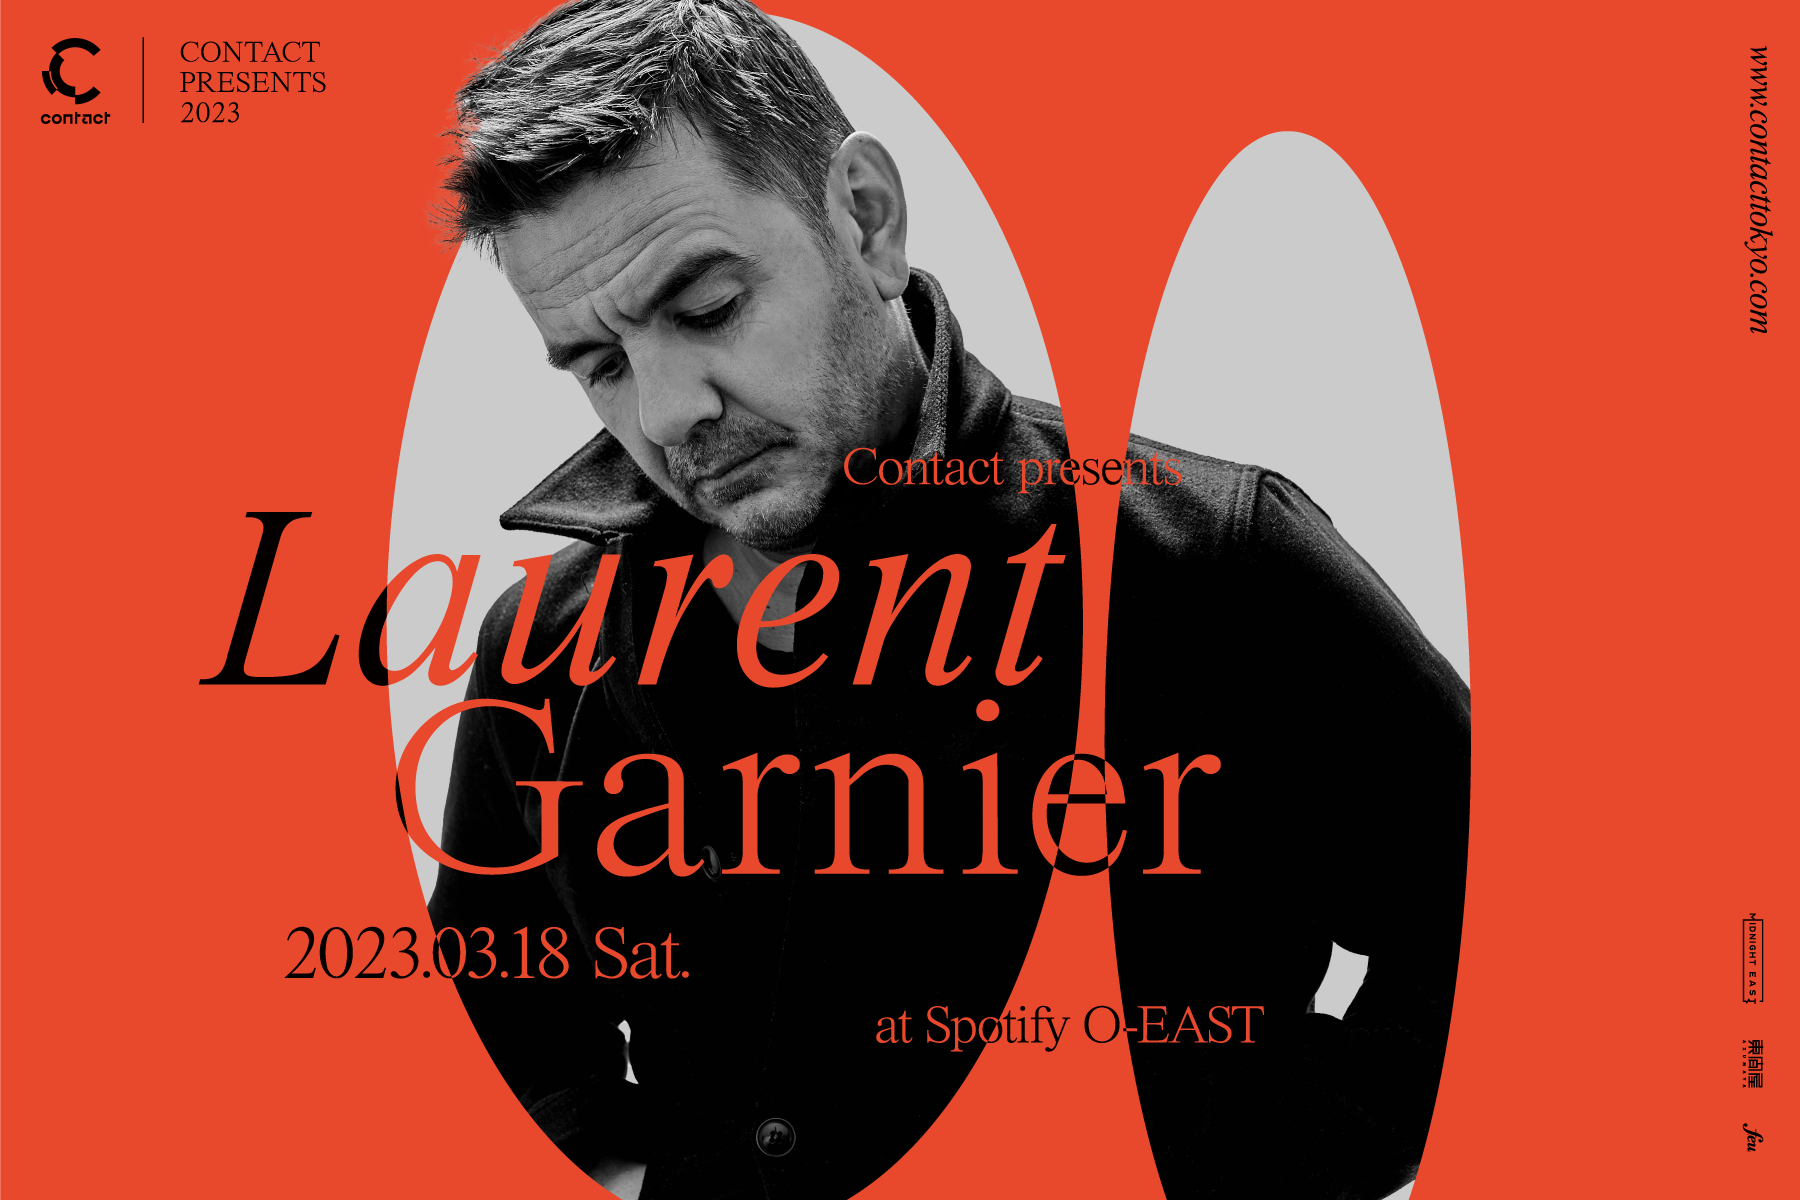 Contact presents LAURENT GARNIER All Night Long at Spotify O-EAST